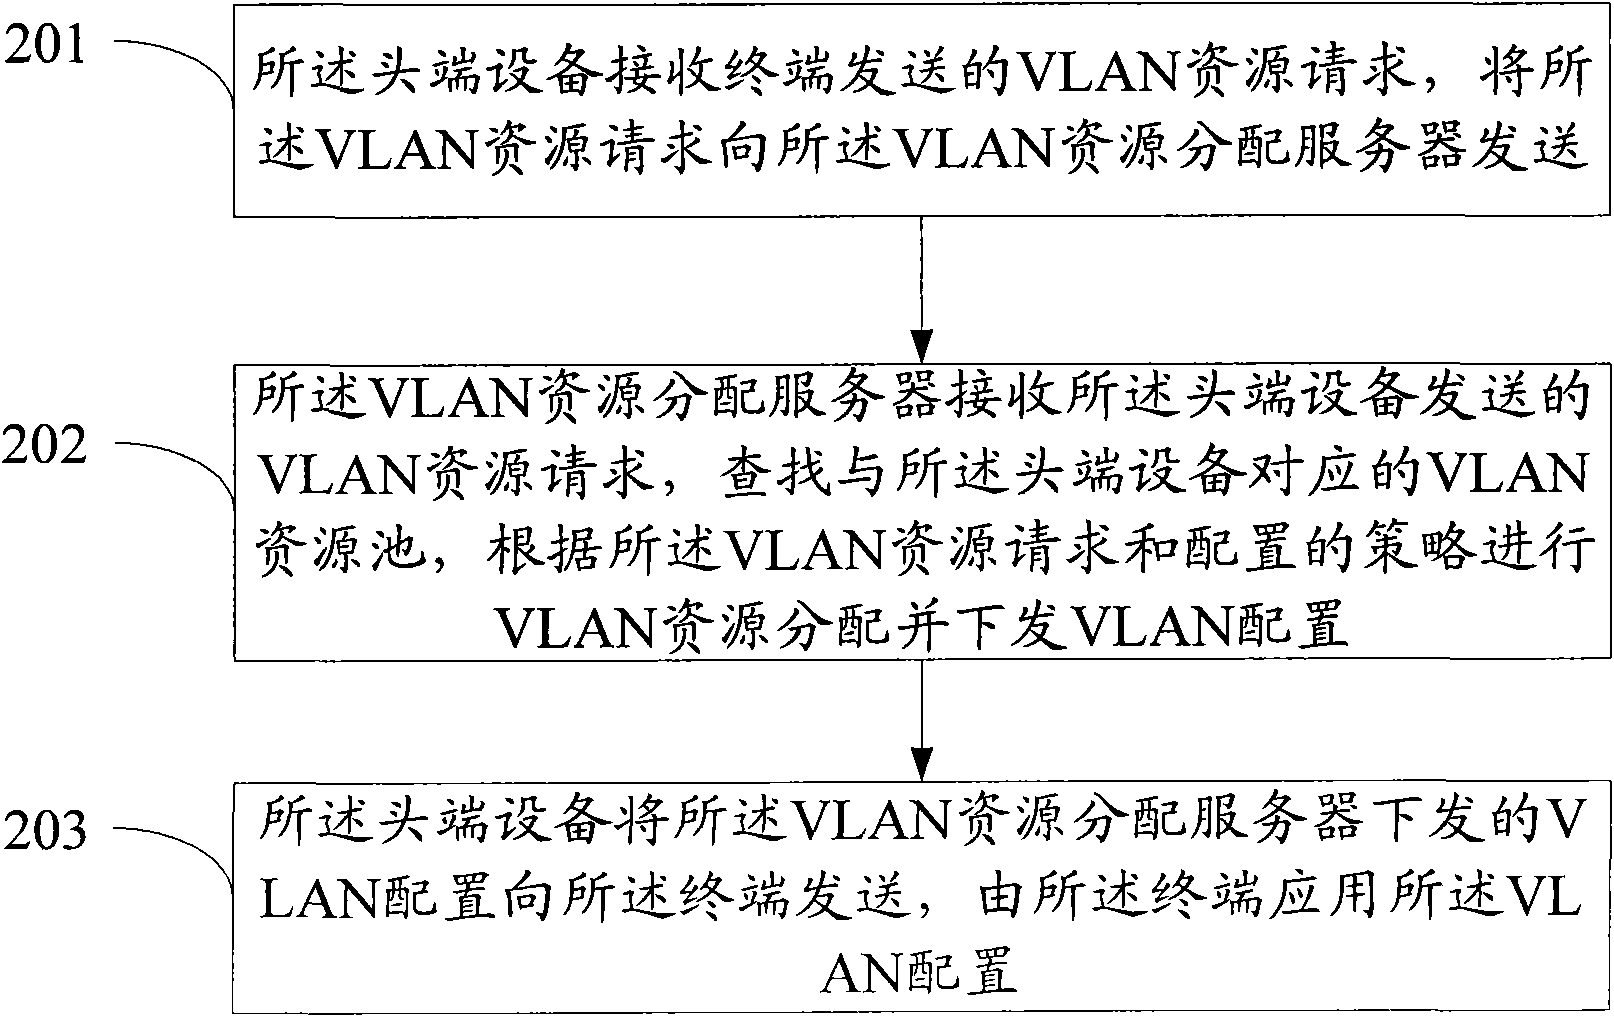 Method and system for automatically distributing VLAN (virtual local area network)